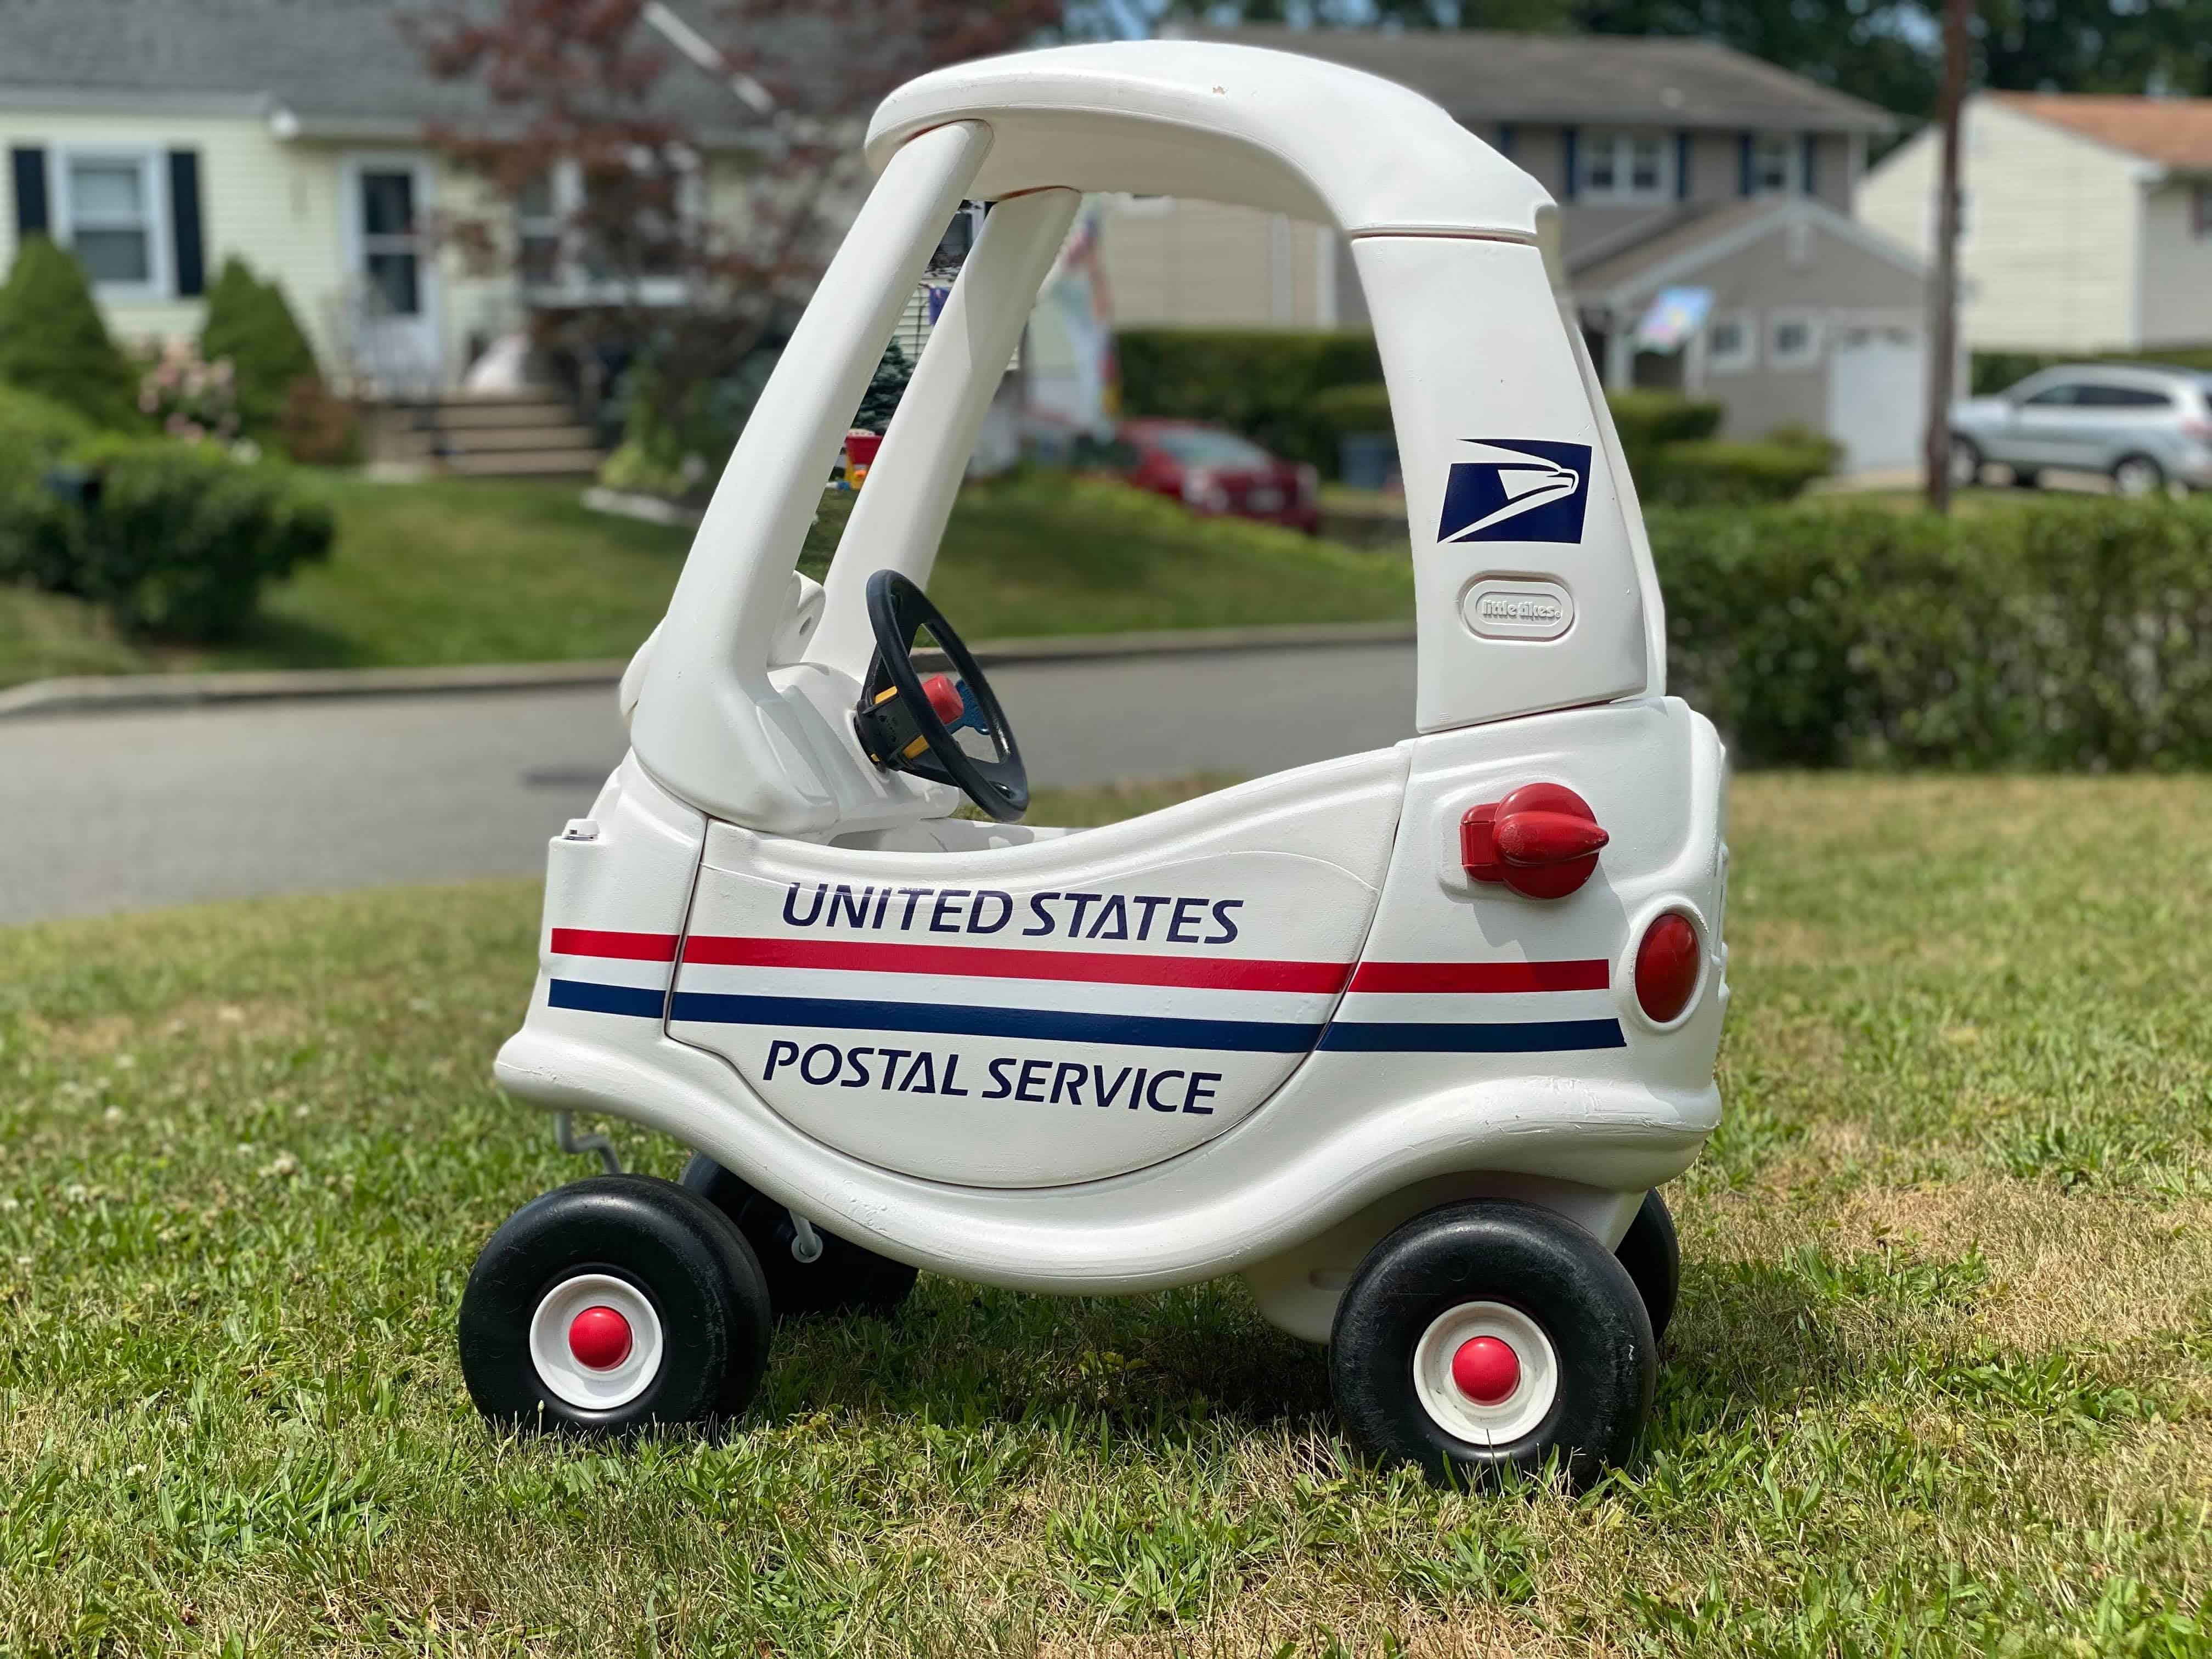 image shows a spray painted cozy coupe plastic car made to look like a postal truck